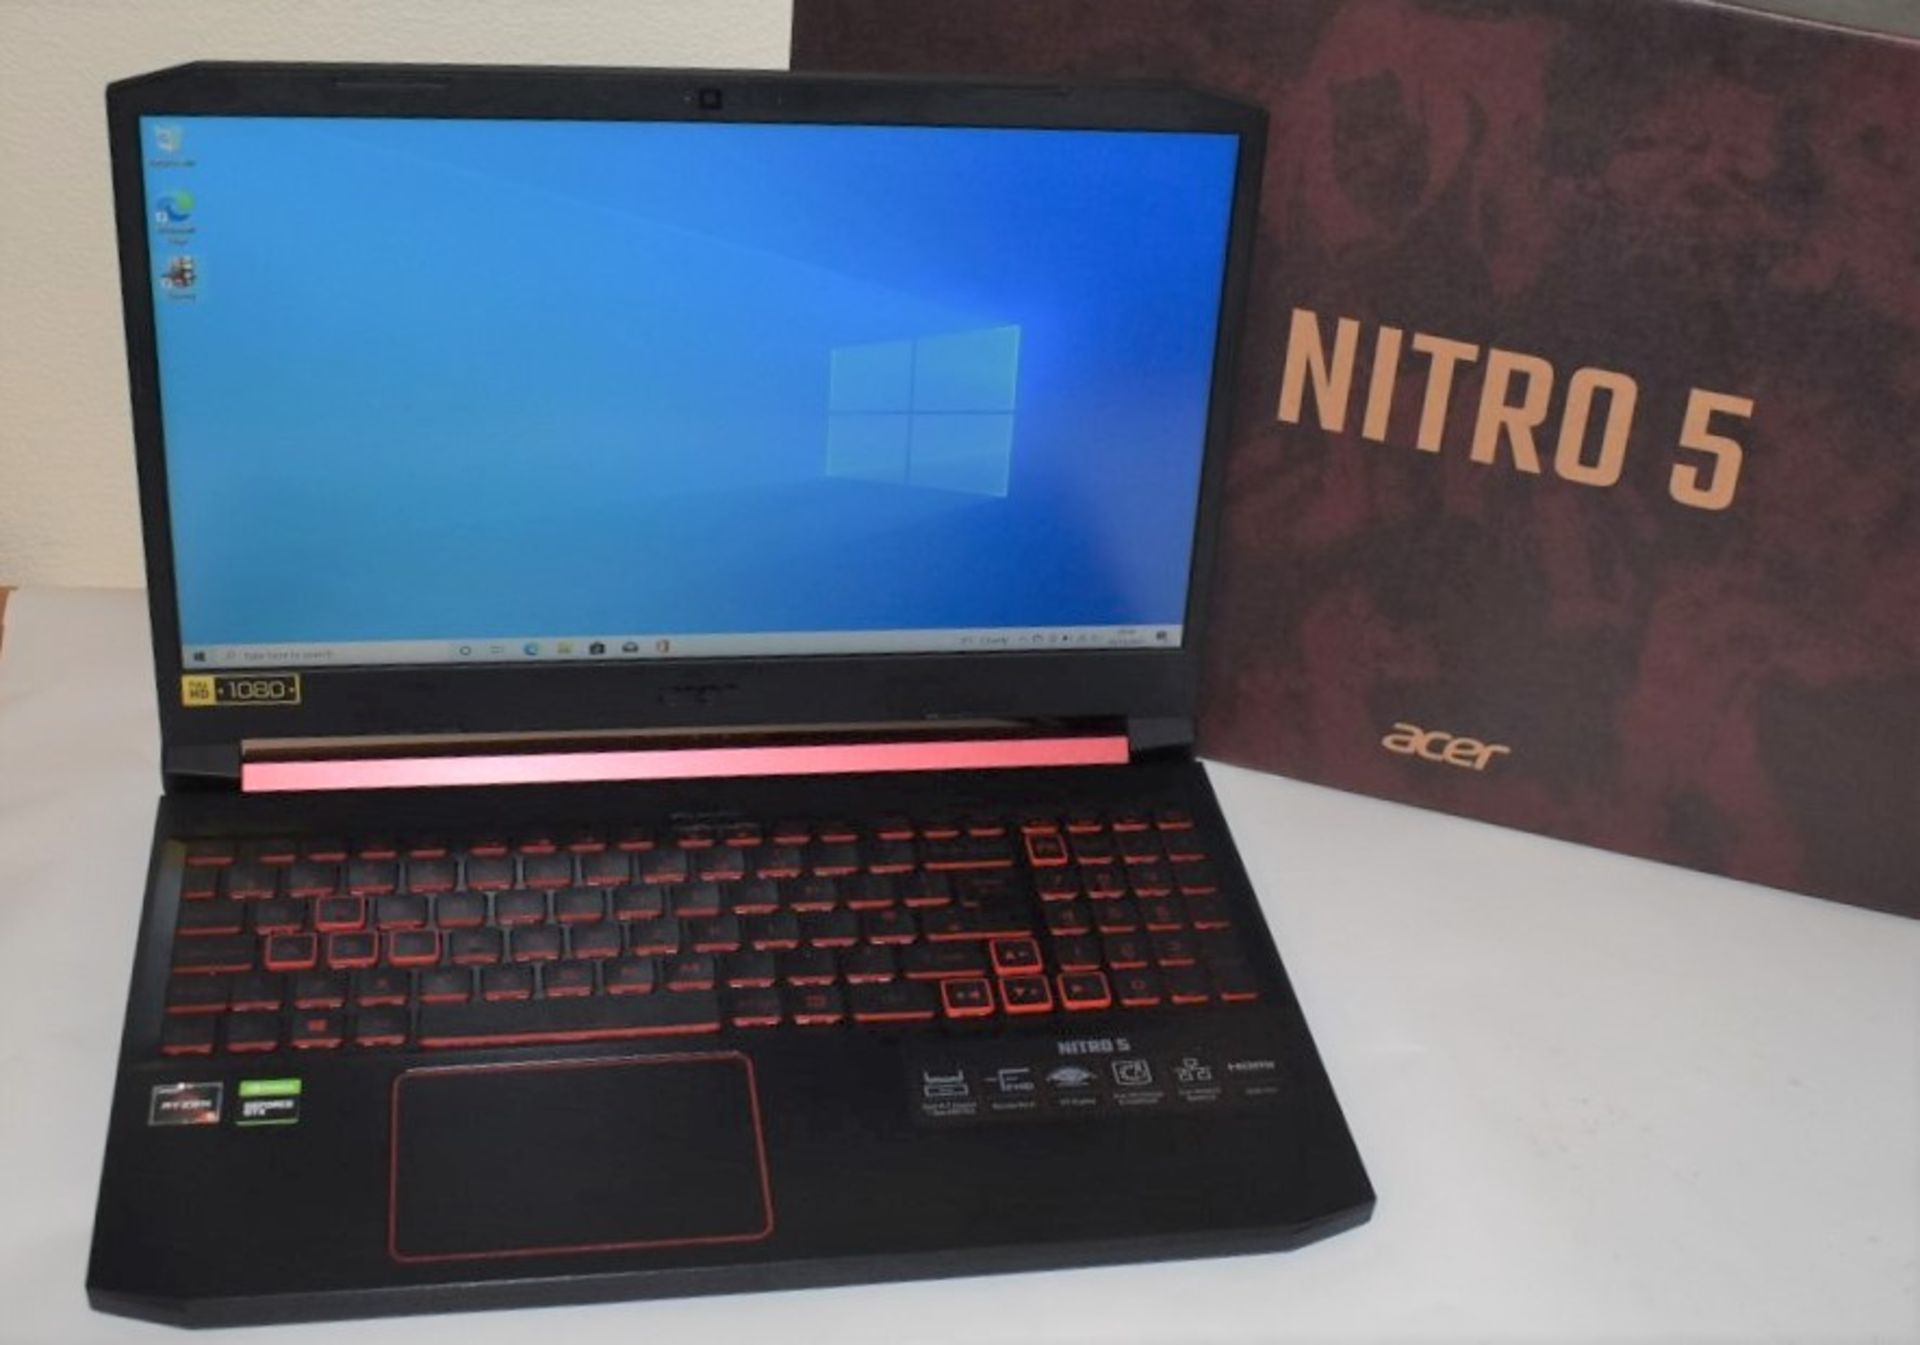 1 x Acer Nitro 5 Gaming Laptop - Features Ryzen 5 Processor, 16g DDR4 Ram, 250gb M.2 System SSD, - Image 5 of 20